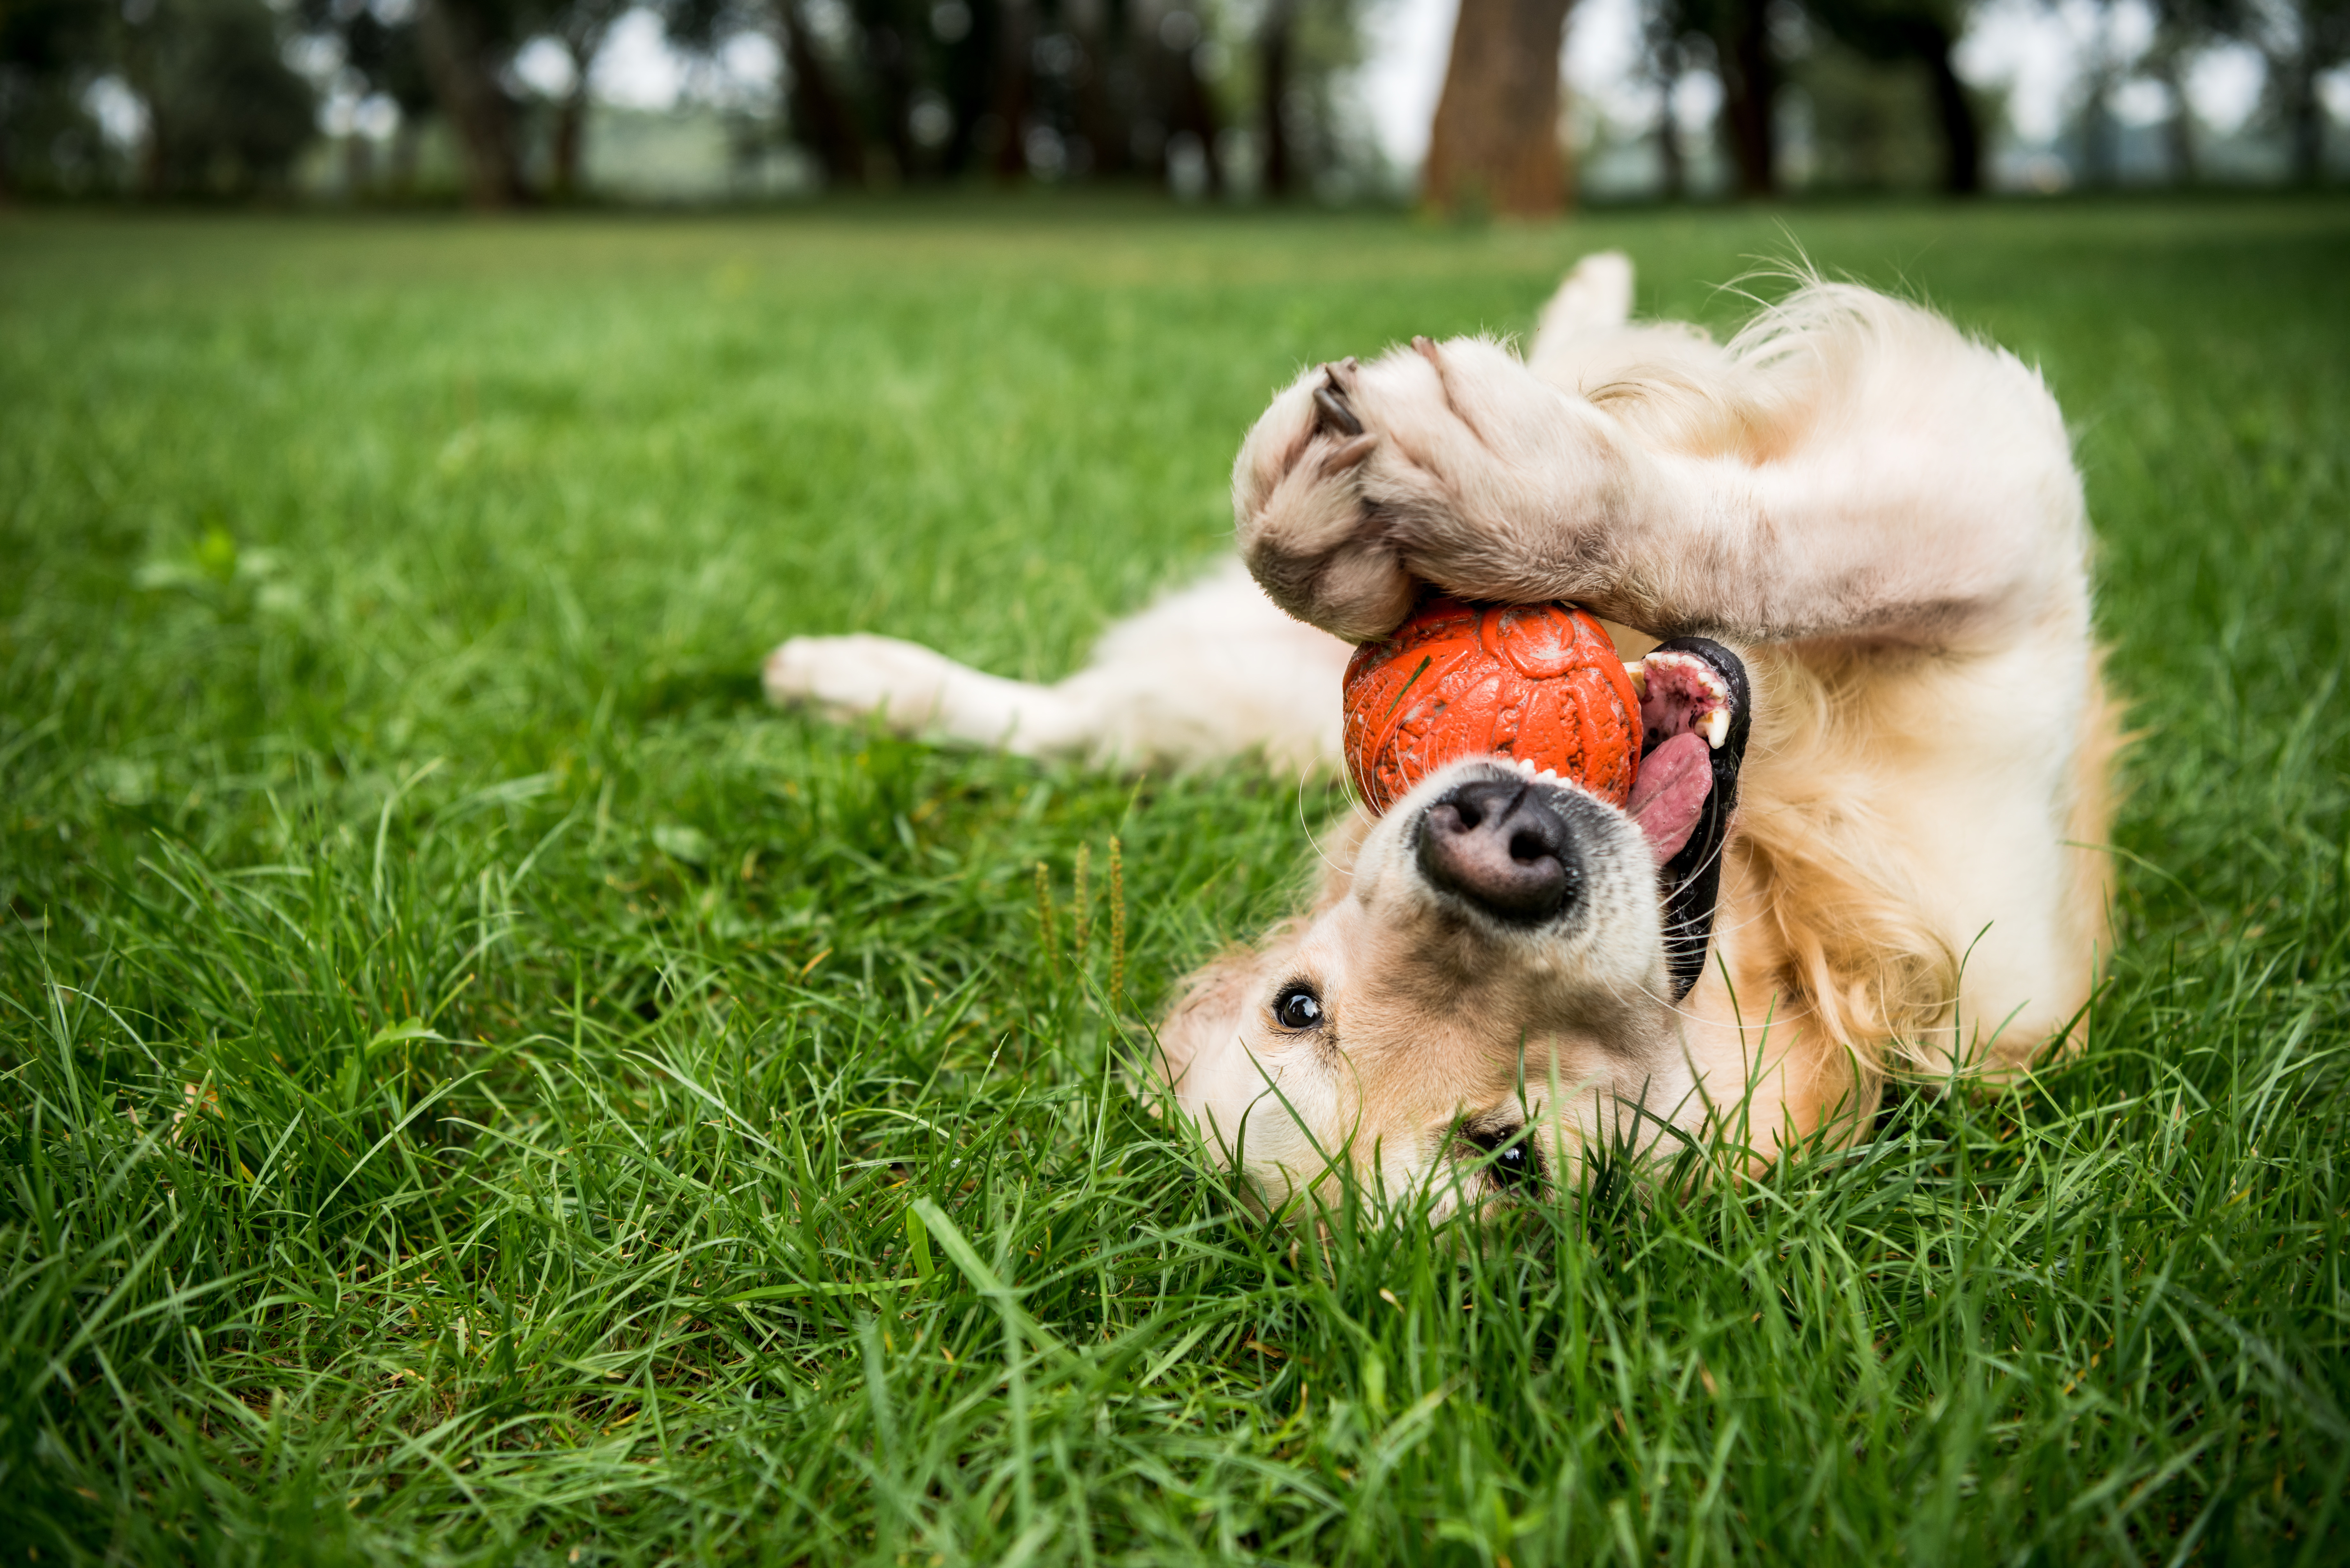  golden retriever dog playing with rubber ball on green lawn